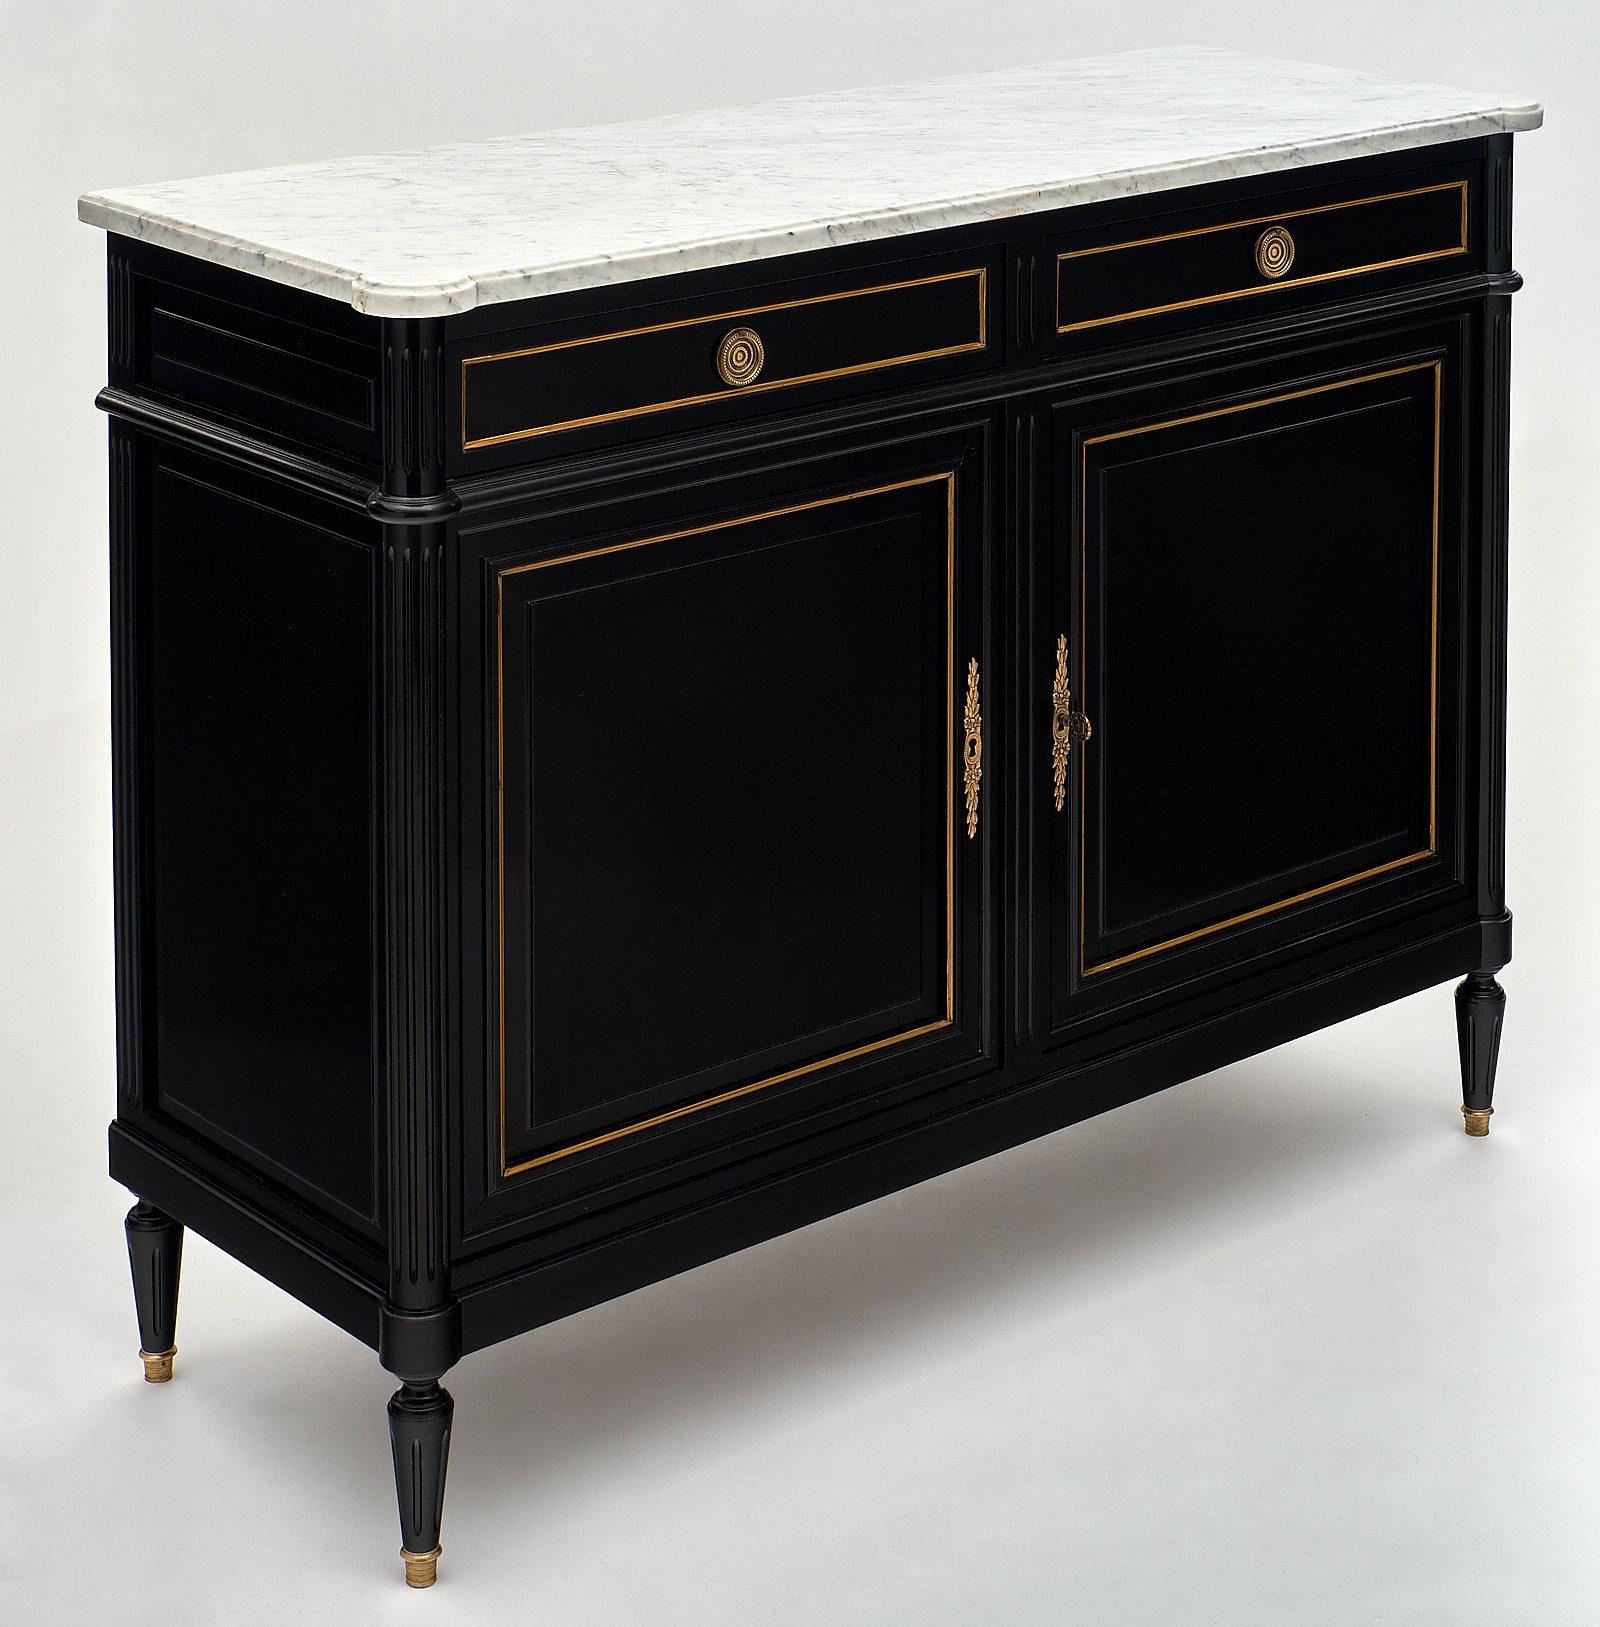 A flawless two-door French antique marble-topped buffet in the Louis XVI style. It is made of ebonized mahogany with a lustrous French polish finish. This piece has two dovetailed drawers above two doors, all featuring gilt brass trims and hardware.